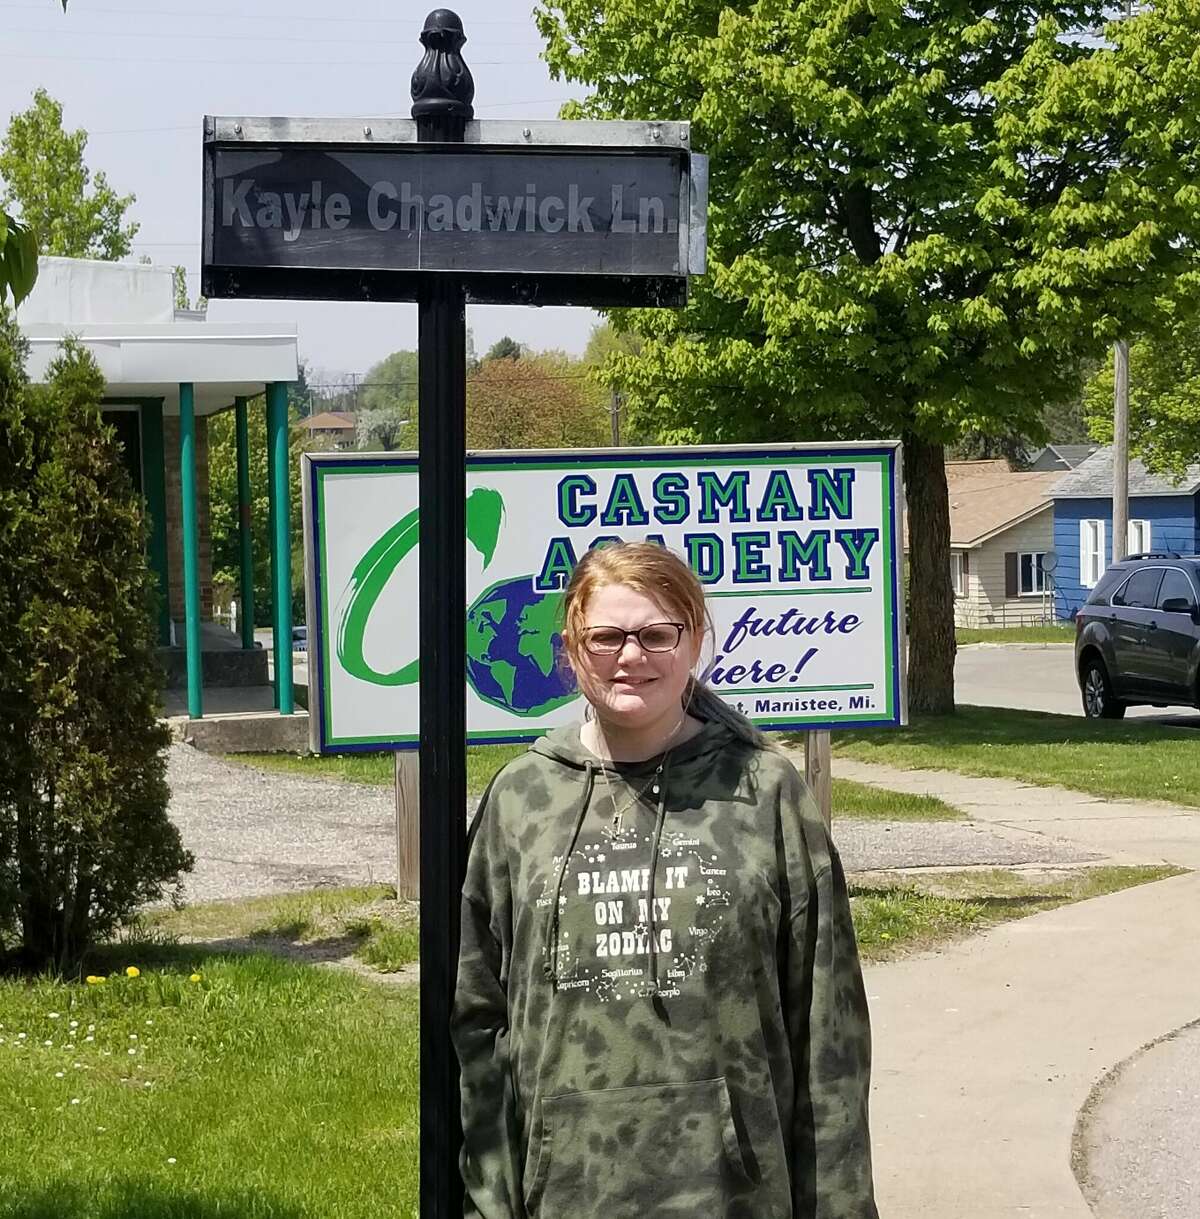 Kayle Chadwick, the CASMAN Academy Student of the Month, poses next to the sign that names the school driveway in her honor.